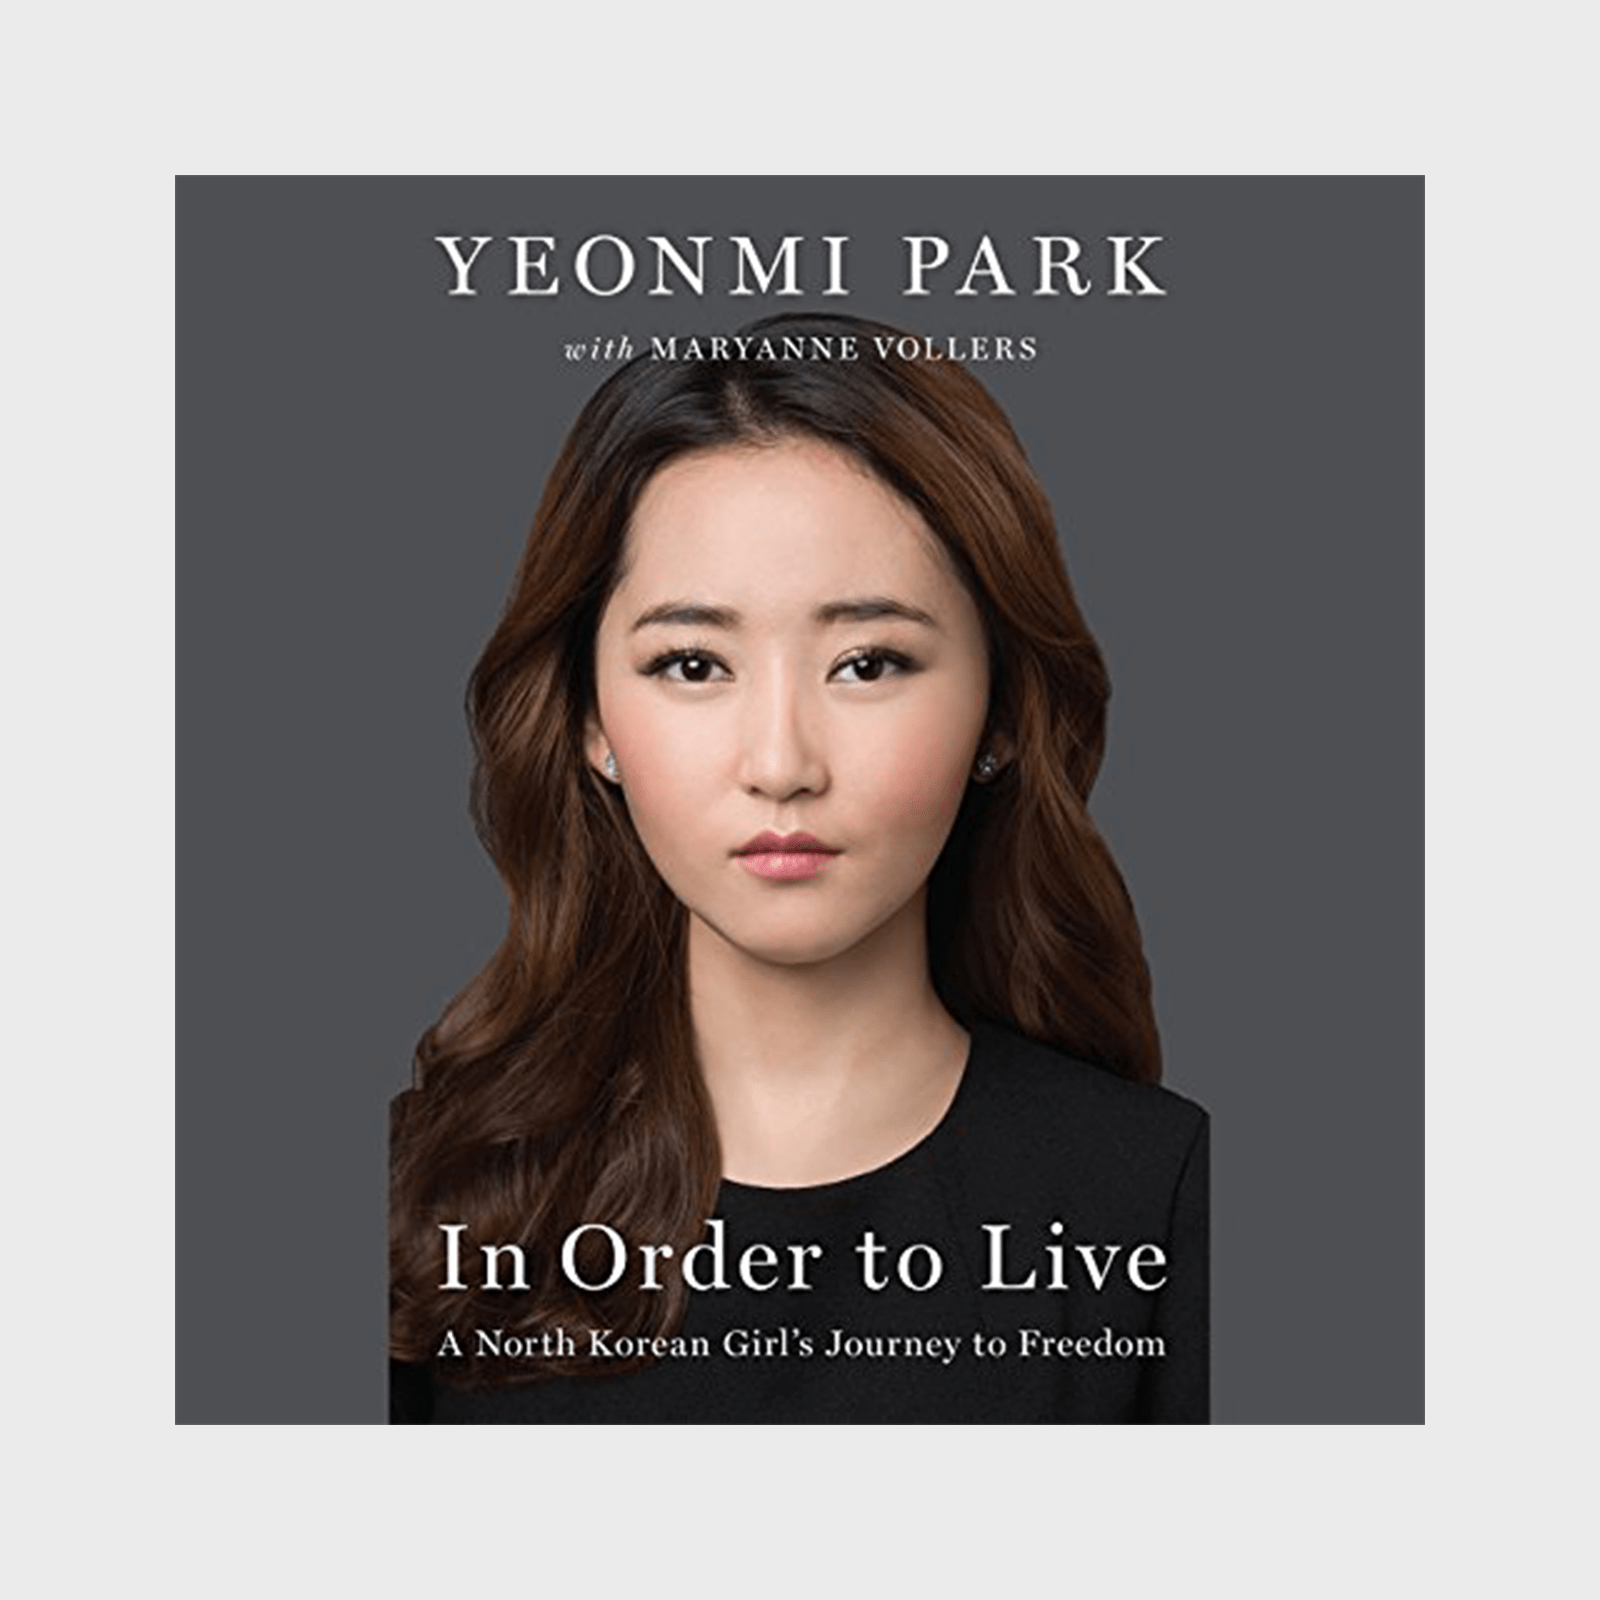 <h3 class=""><strong><em>In Order to Live</em> by Yeonmi Park</strong></h3> <p>Brainwashing. Starvation. Human trafficking. Rats feasting on the bodies that line the streets. To say that life in North Korea is grim is an understatement. In one of the most gripping <a href="https://www.rd.com/list/best-autobiographies/" rel="noopener noreferrer">autobiographies</a> you'll ever read, Yeonmi Park details her life in North Korea and the harrowing details of fleeing with her mother at just 13 years old. <a href="https://www.amazon.com/dp/B0143PGHEU" rel="noopener noreferrer"><em>In Order to Live</em></a> candidly recounts what it was like to be sold by human traffickers, to make a second escape through a brutal desert, and to know that death is the best option should she be caught. This incredible story of one girl's bravery, resilience, and desire for a better life will leave you reeling.</p> <p class="listicle-page__cta-button-shop"><a class="shop-btn" href="https://www.amazon.com/dp/B0143PGHEU">Shop Now</a></p>